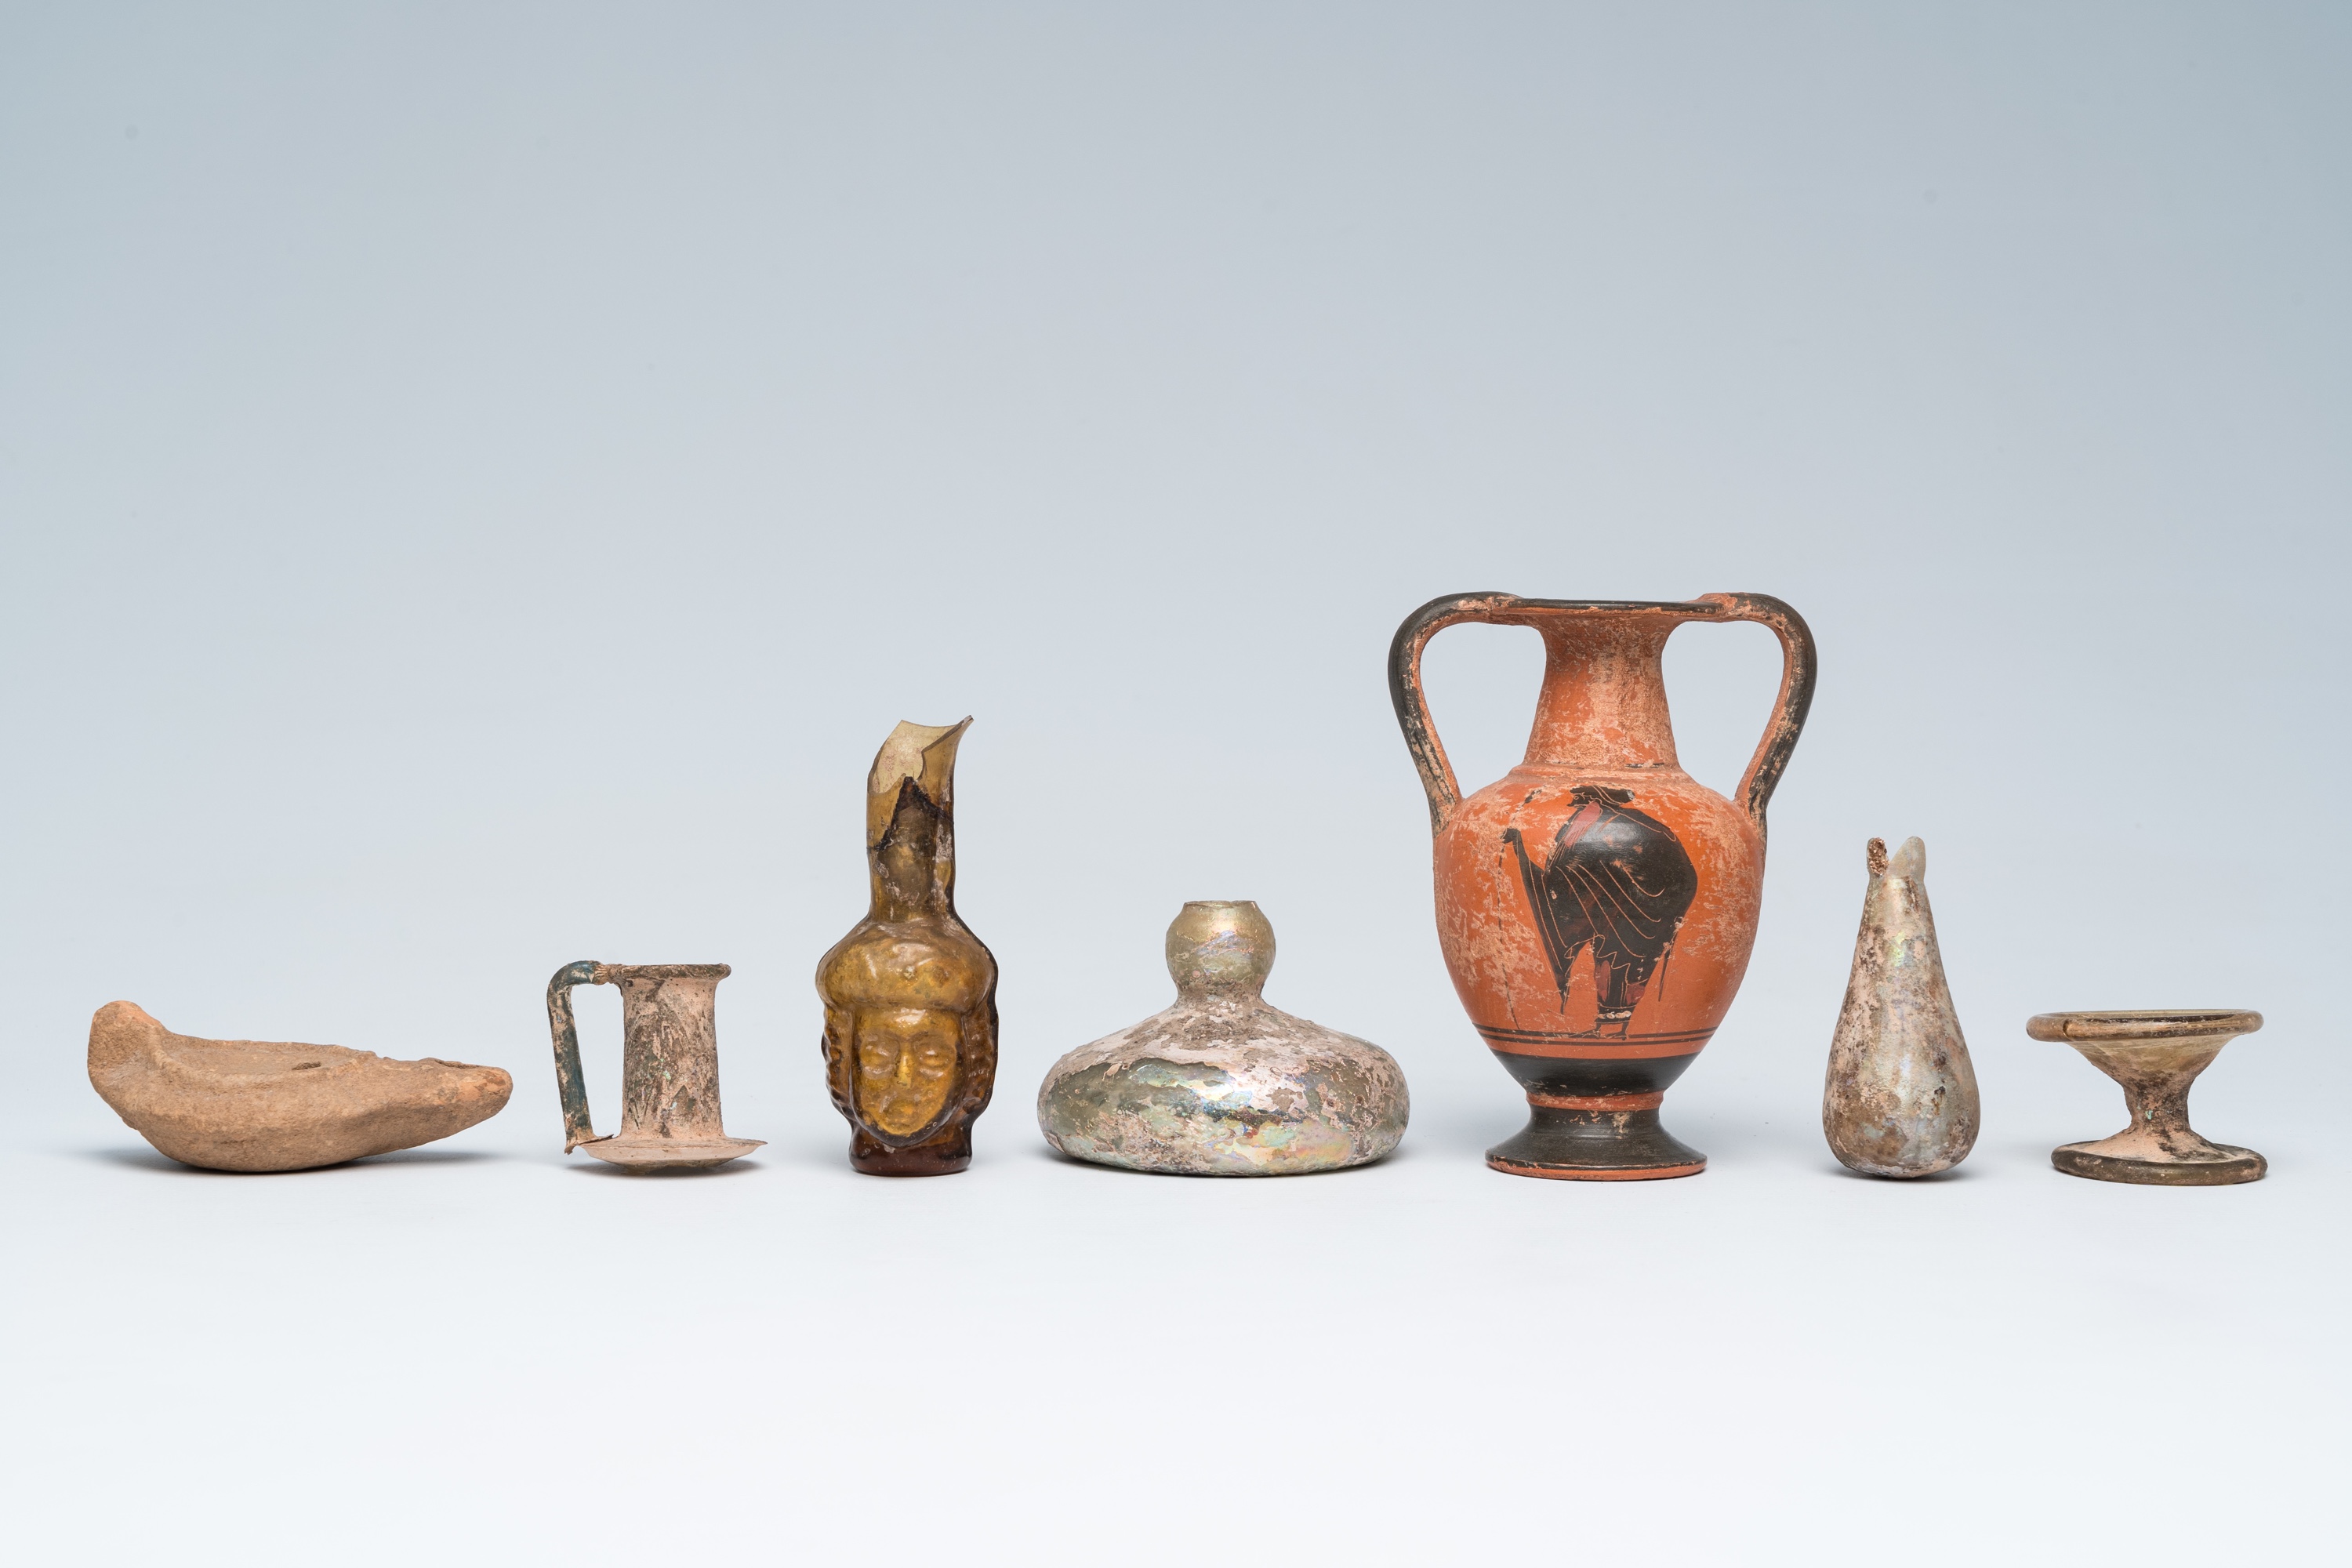 A varied collection of archaeological glass and pottery utensils and fragments, Greco-Roman period a - Image 2 of 7